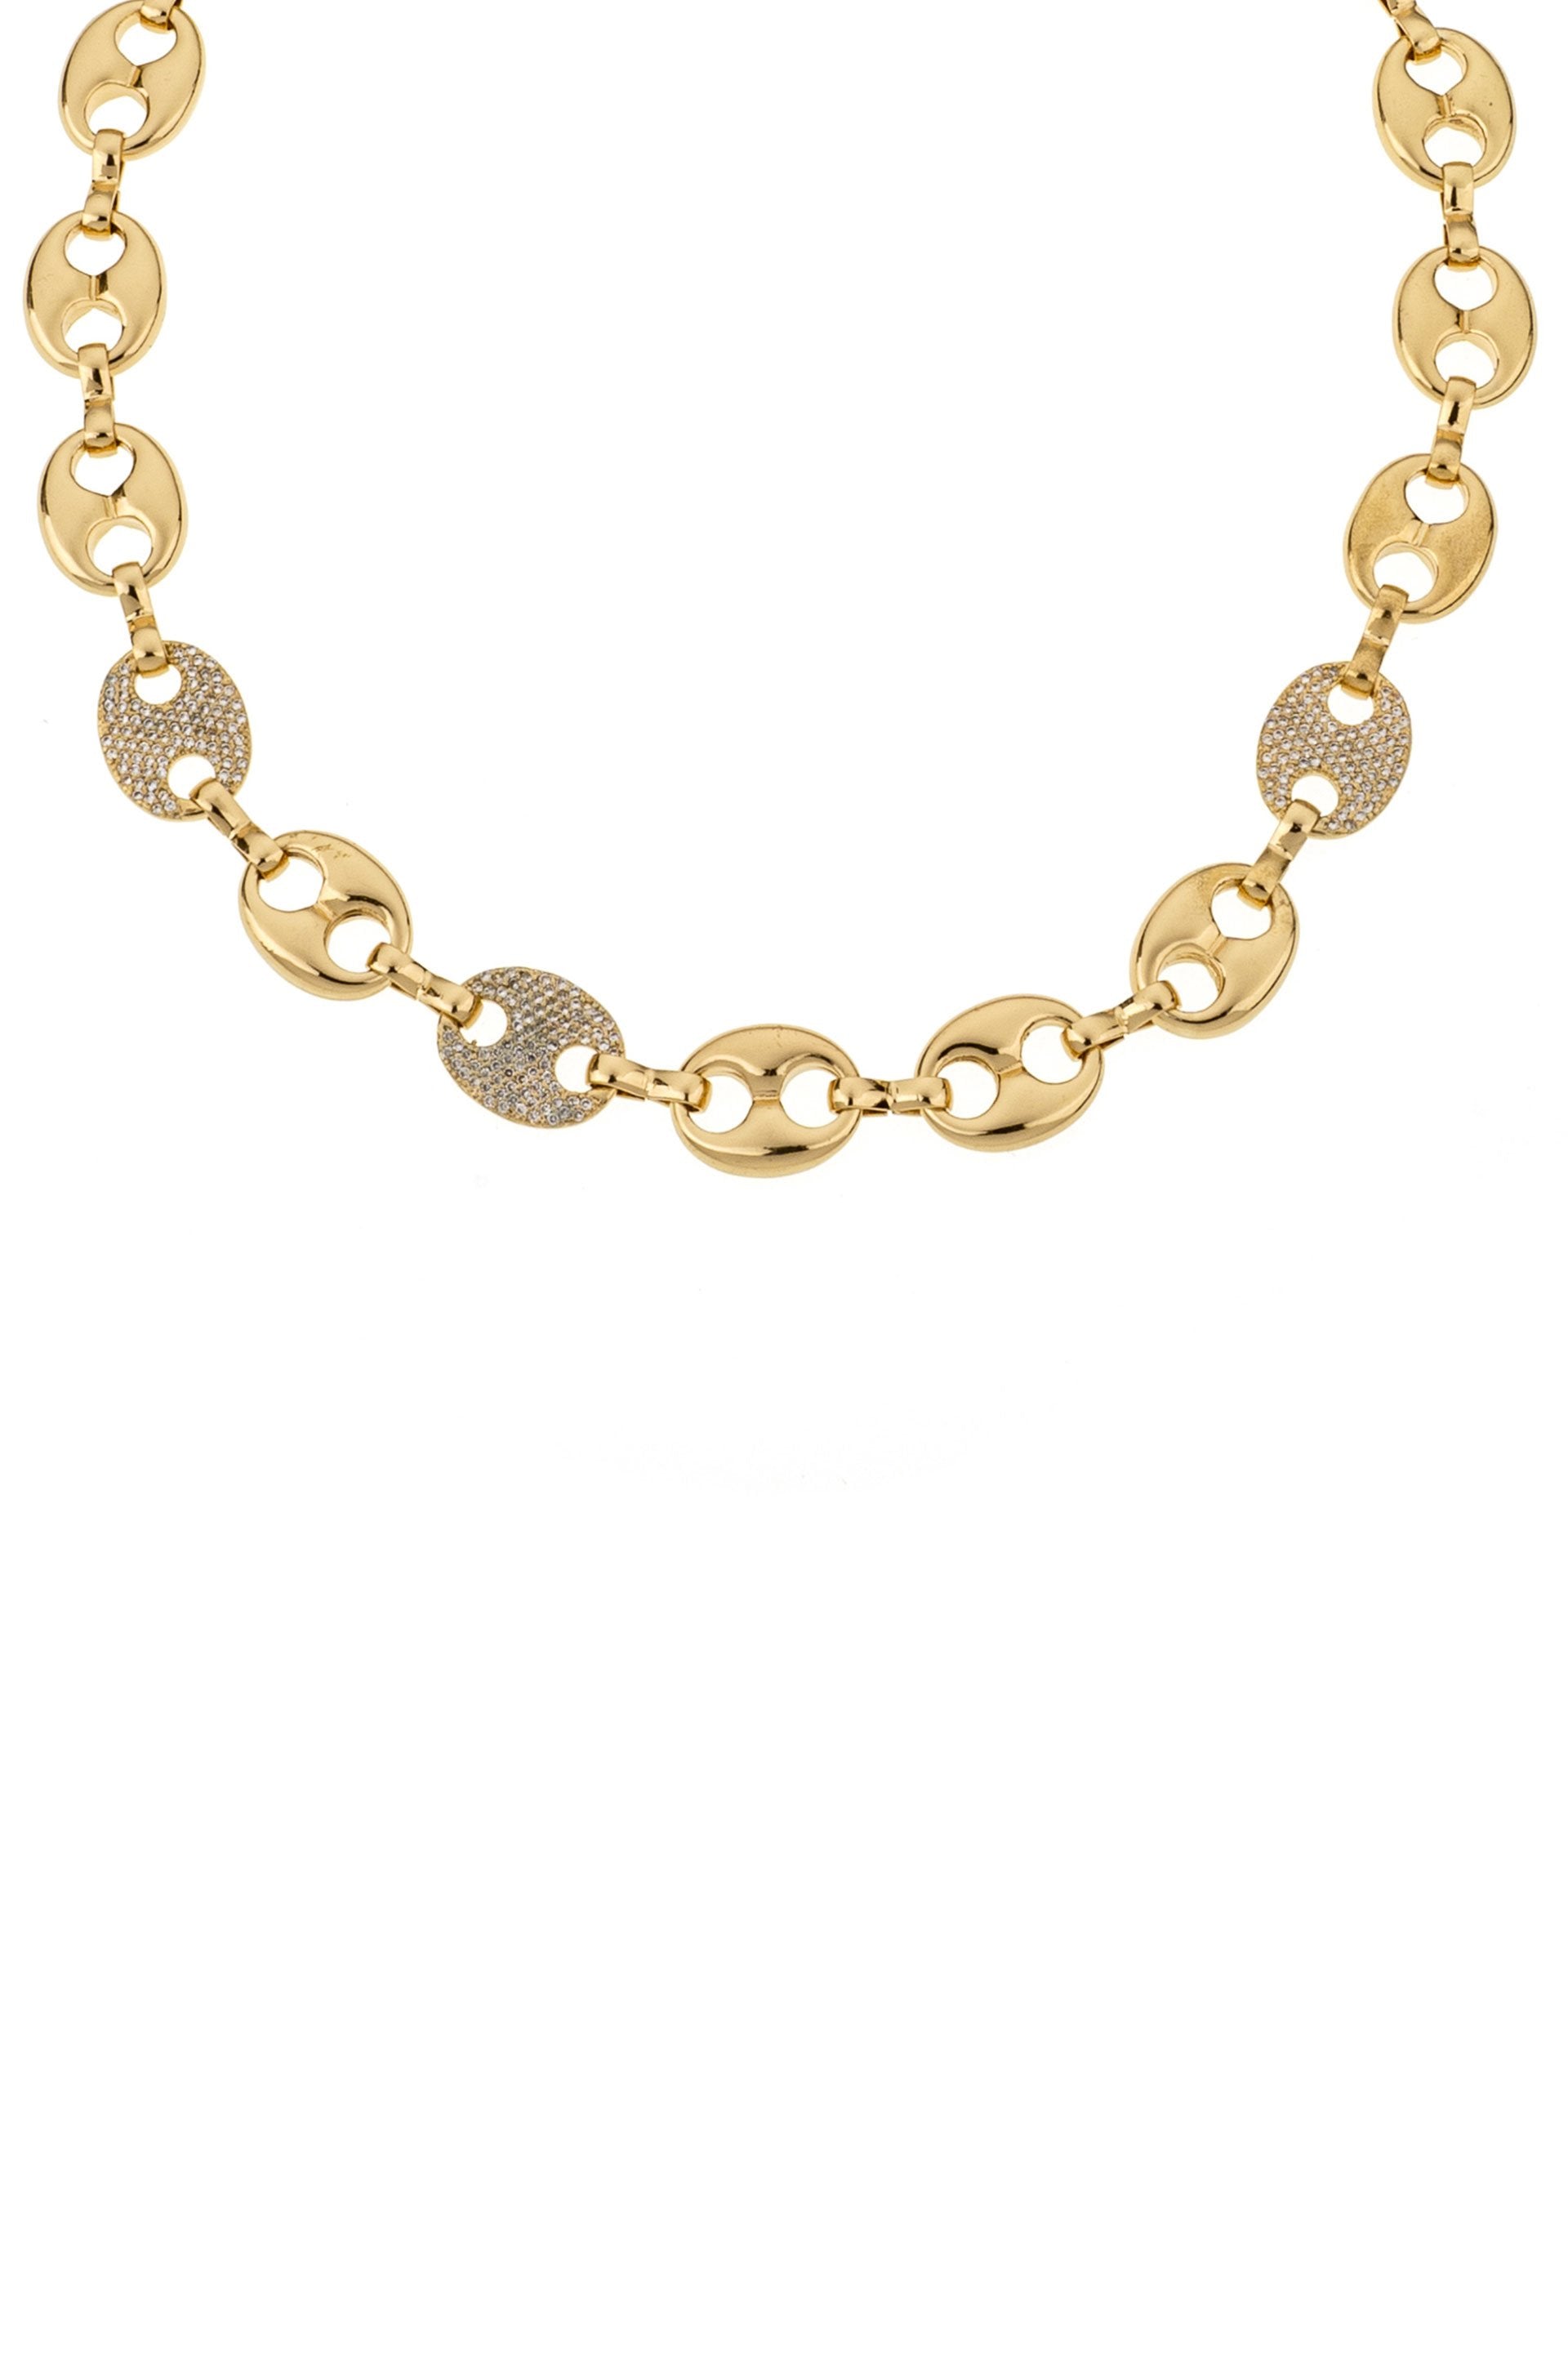 Modern Chains with Crystal Links Necklace in Gold on white close up